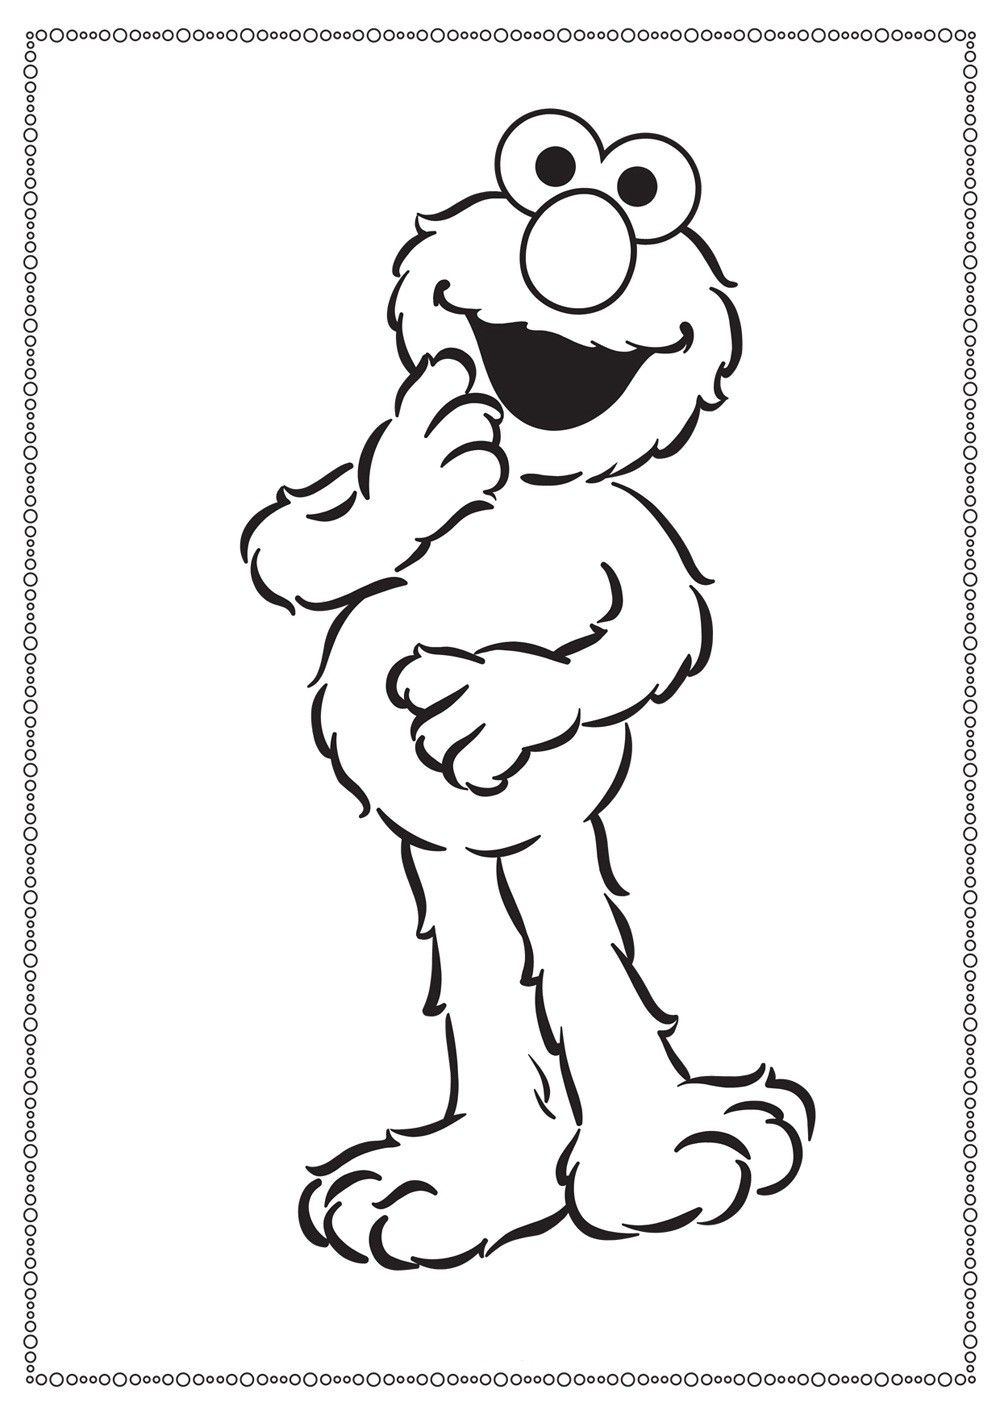 Character Sesame Street Alphabet Coloring Pages - Coloring Pages ...